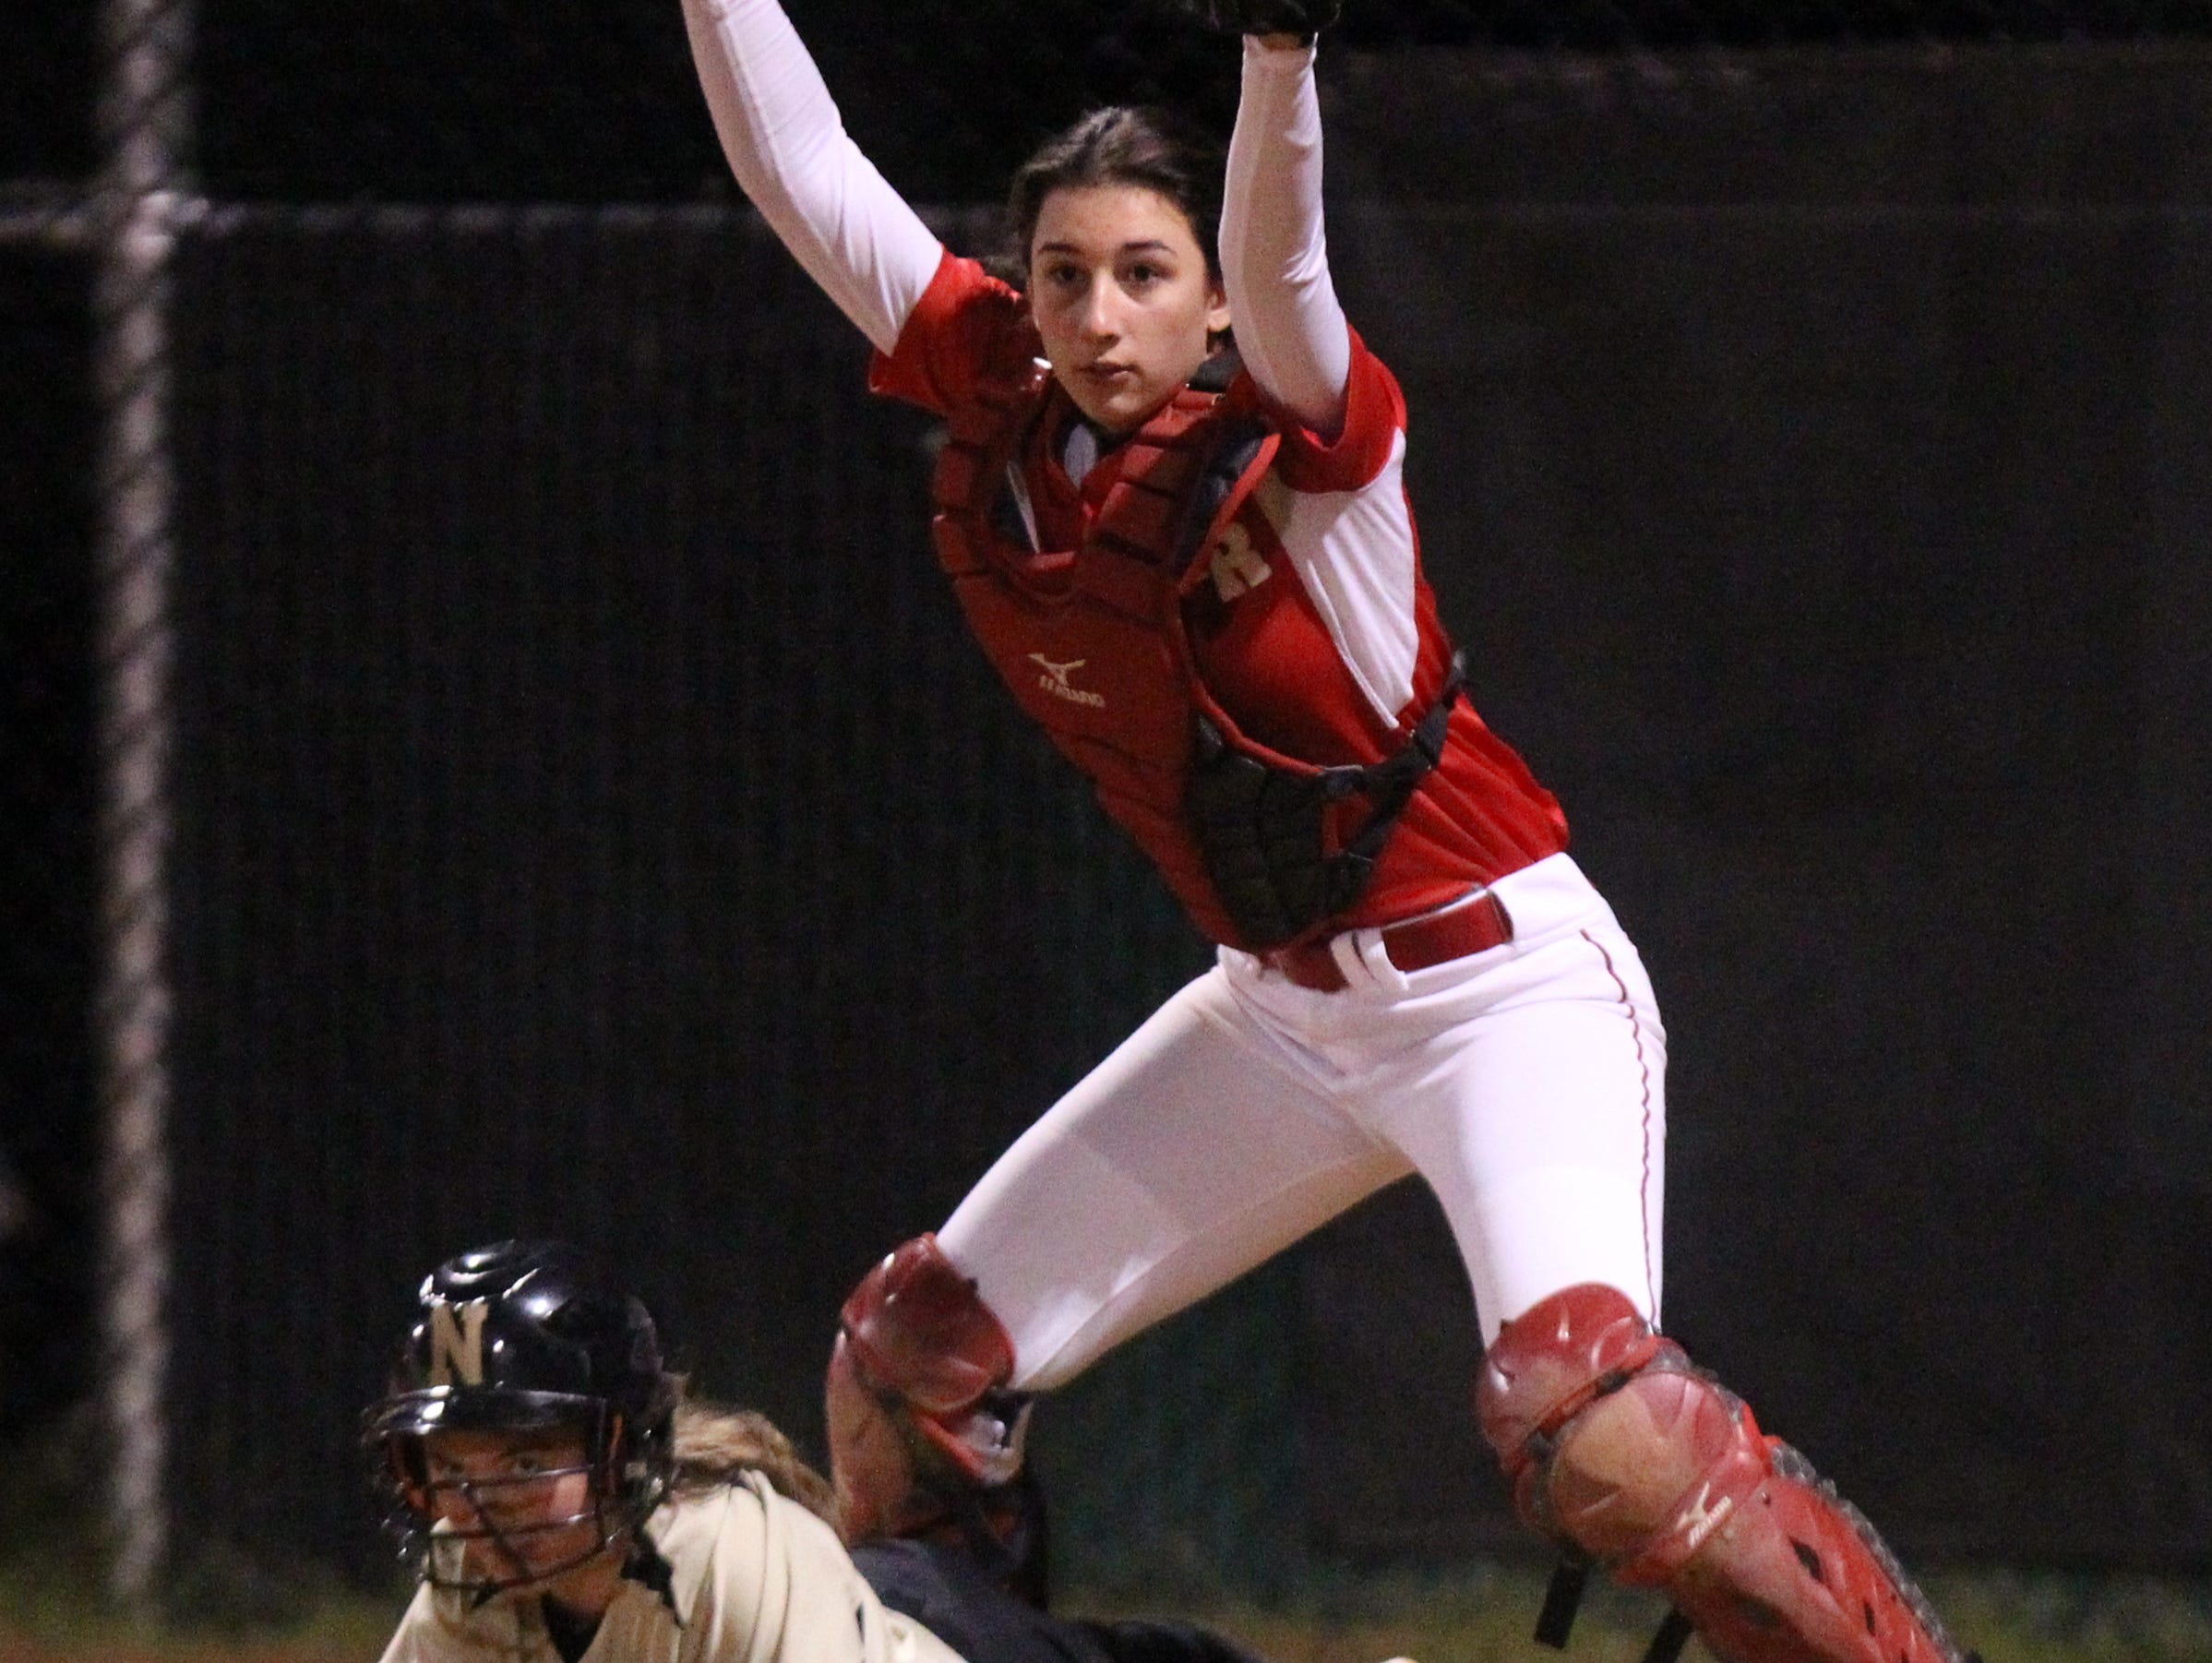 North Rockland catcher Bella Chiorazzi shows the ball after making a tag at the plate against Nanuet.